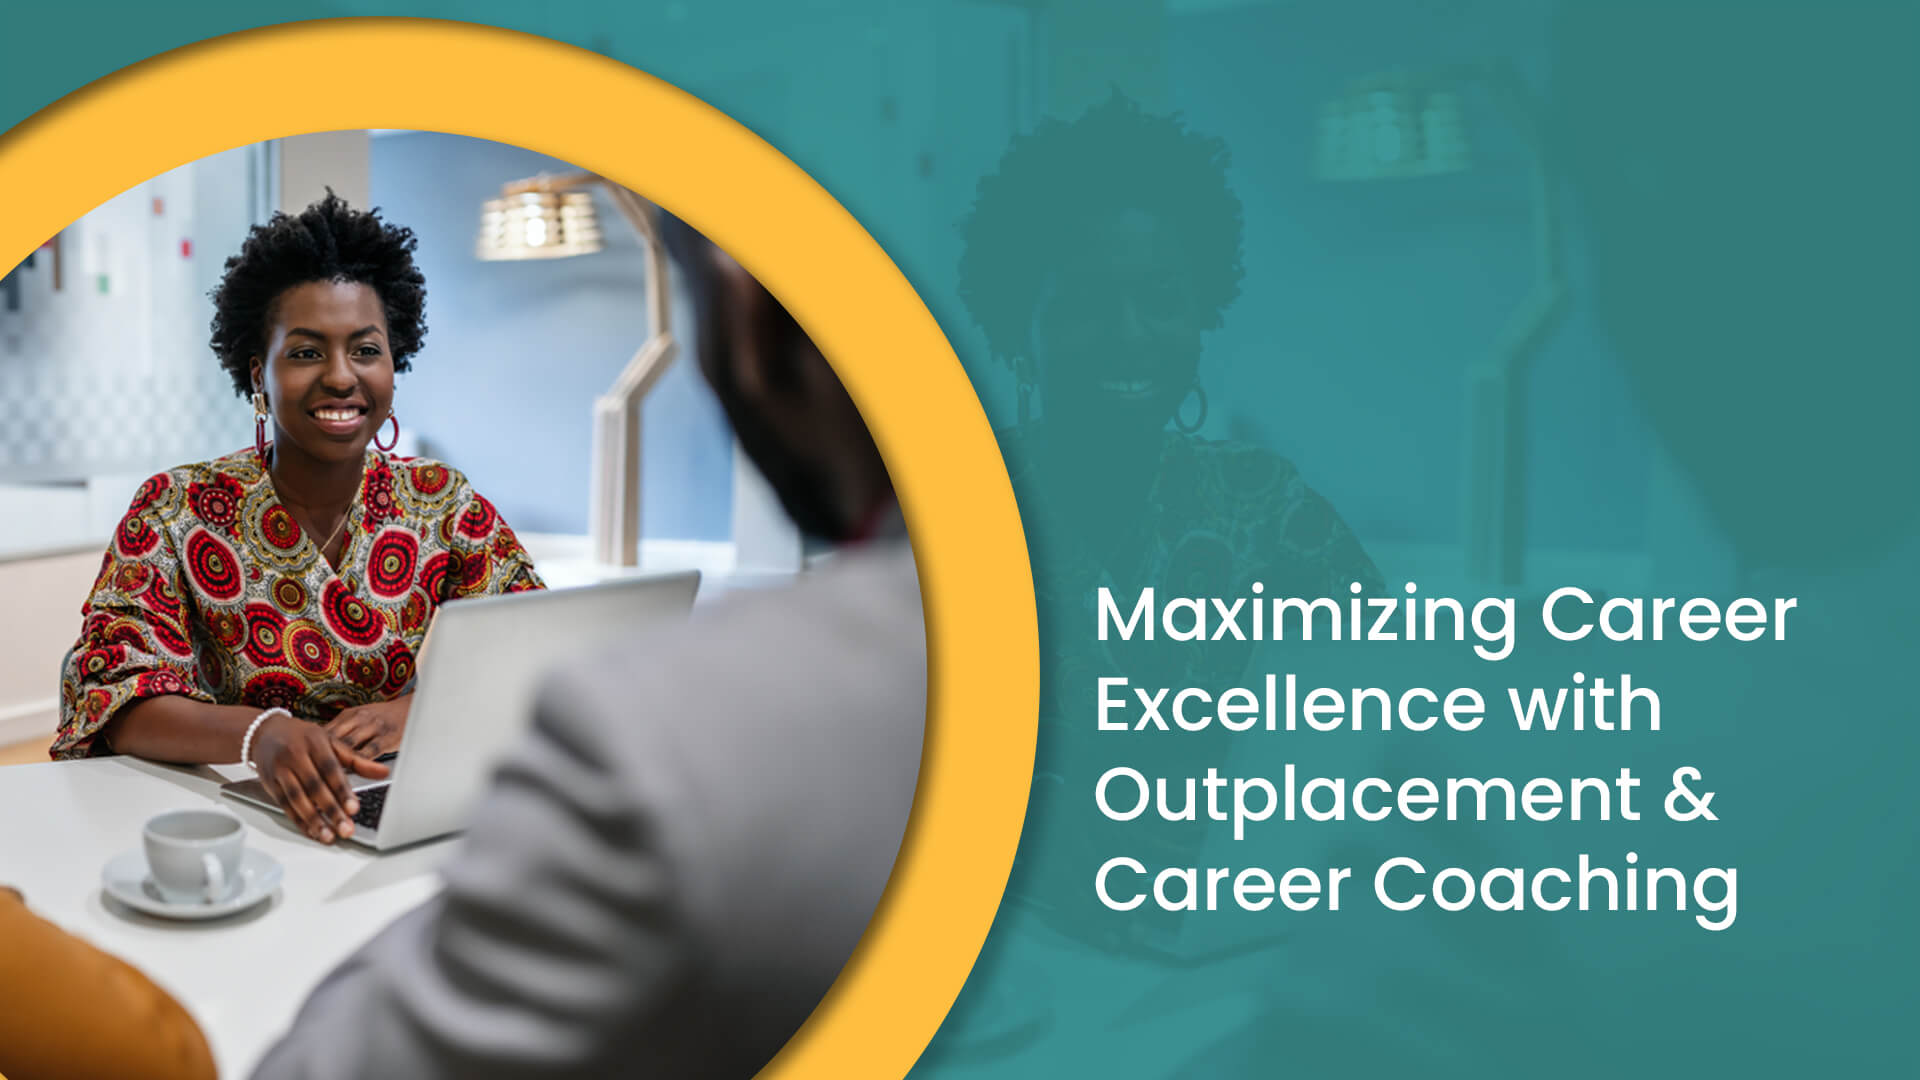 Maximizing career excellence with outplacement and career coaching